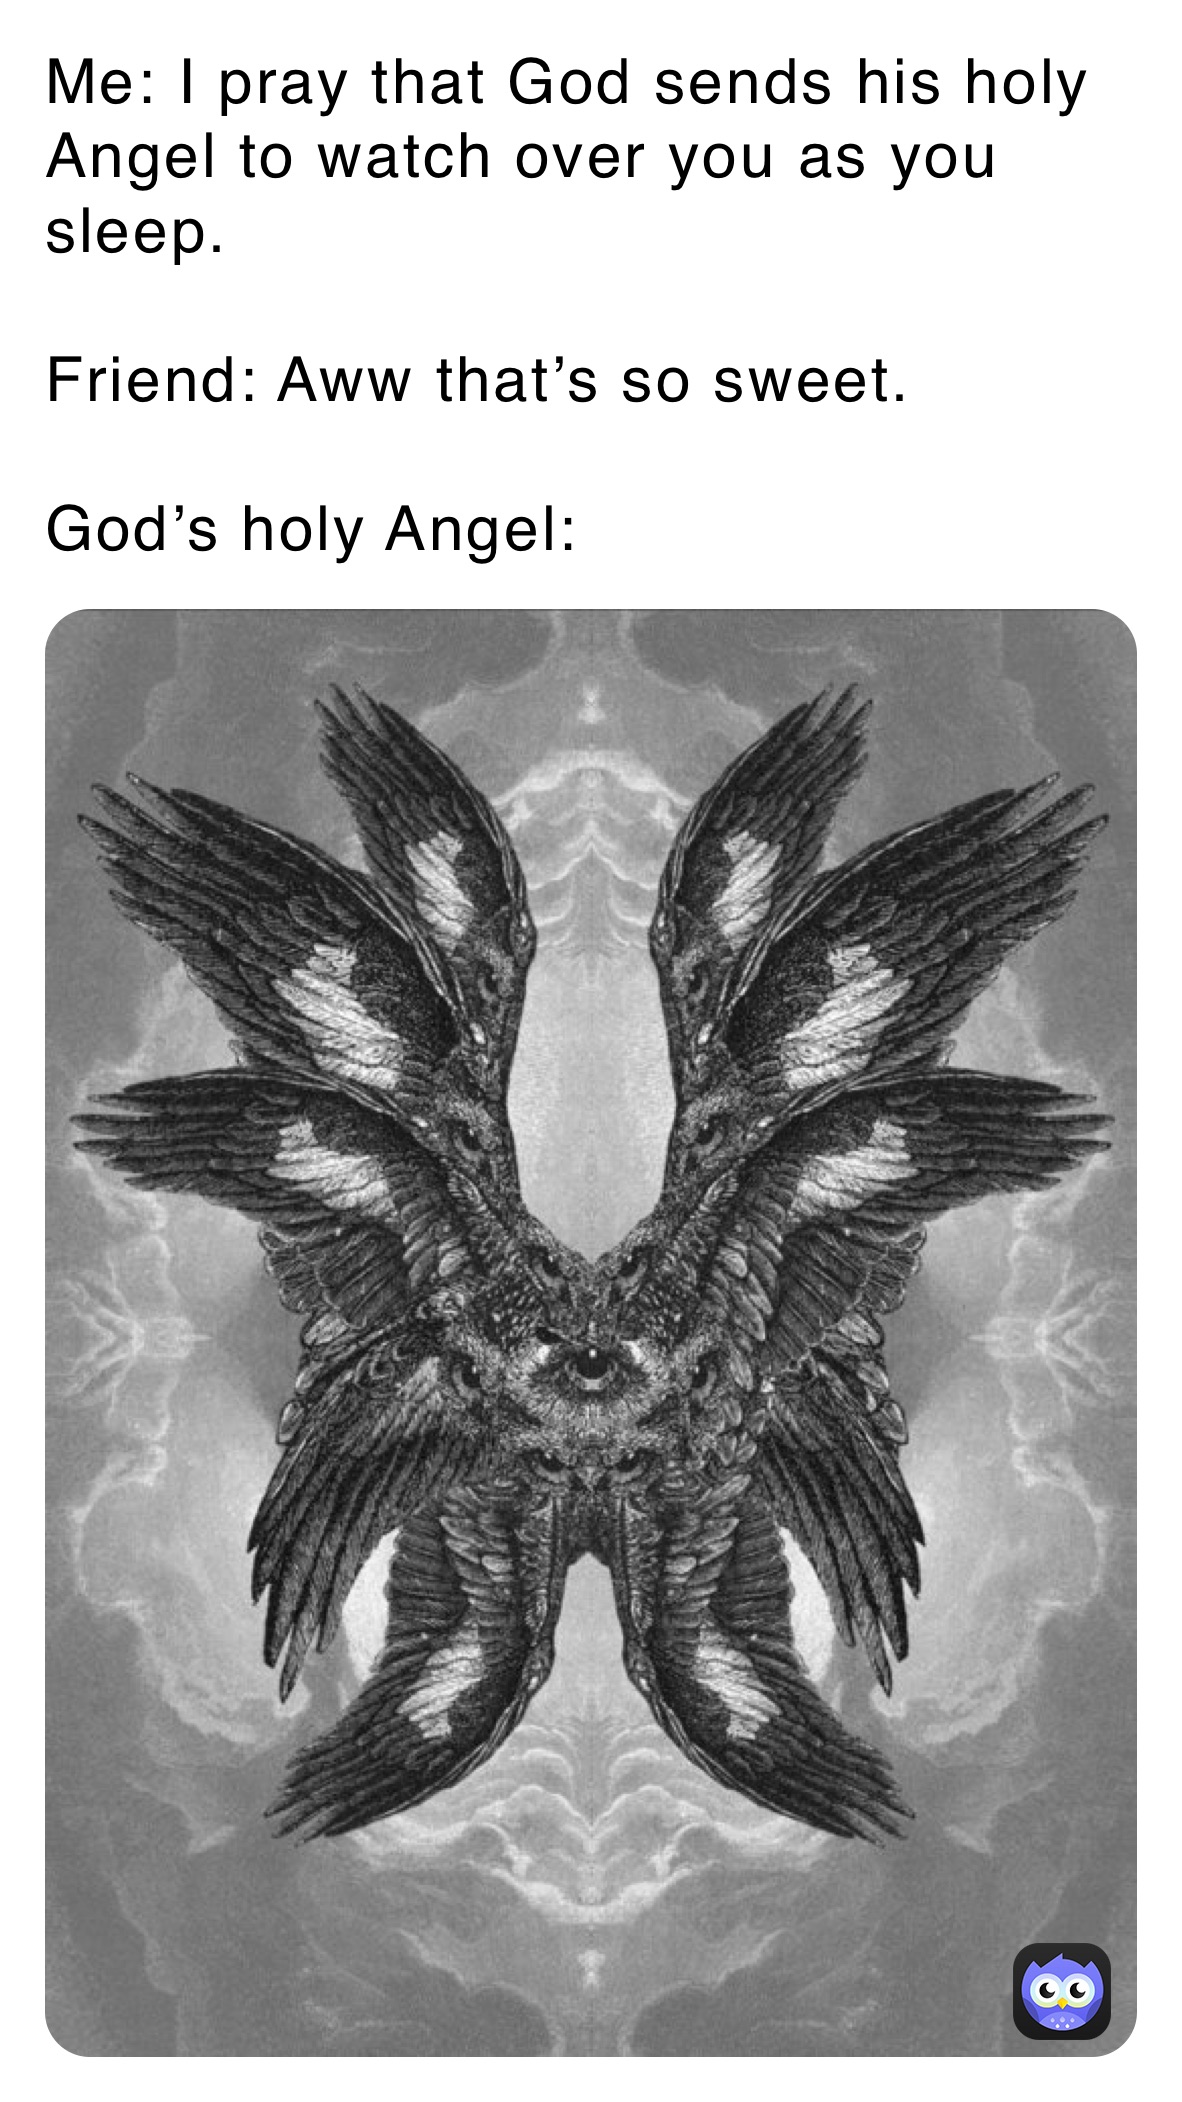 Me: I pray that God sends his holy Angel to watch over you as you sleep. 

Friend: Aww that’s so sweet. 

God’s holy Angel: